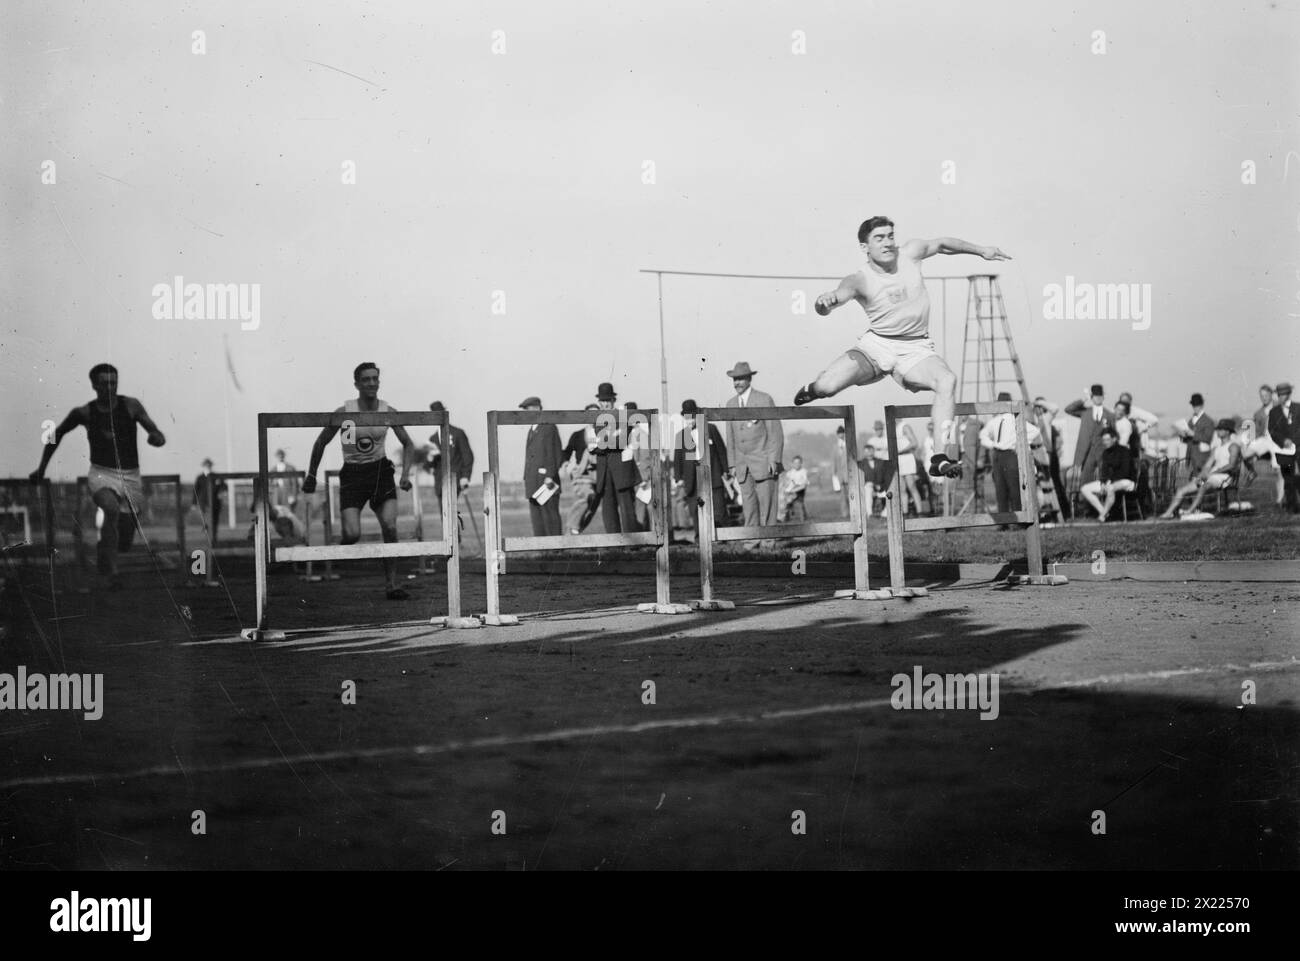 J.J. Eller wins 120 yd. Hurdle 1911, 1911. Shows John Jacob (&quot;Jack&quot;or J.J.) Eller, Jr. (1883-1967), an American track and field athlete competing in the 120 yard hurdle race, held Sept. 16, 1911, at Celtic Park in Queens, New York City. Stock Photo